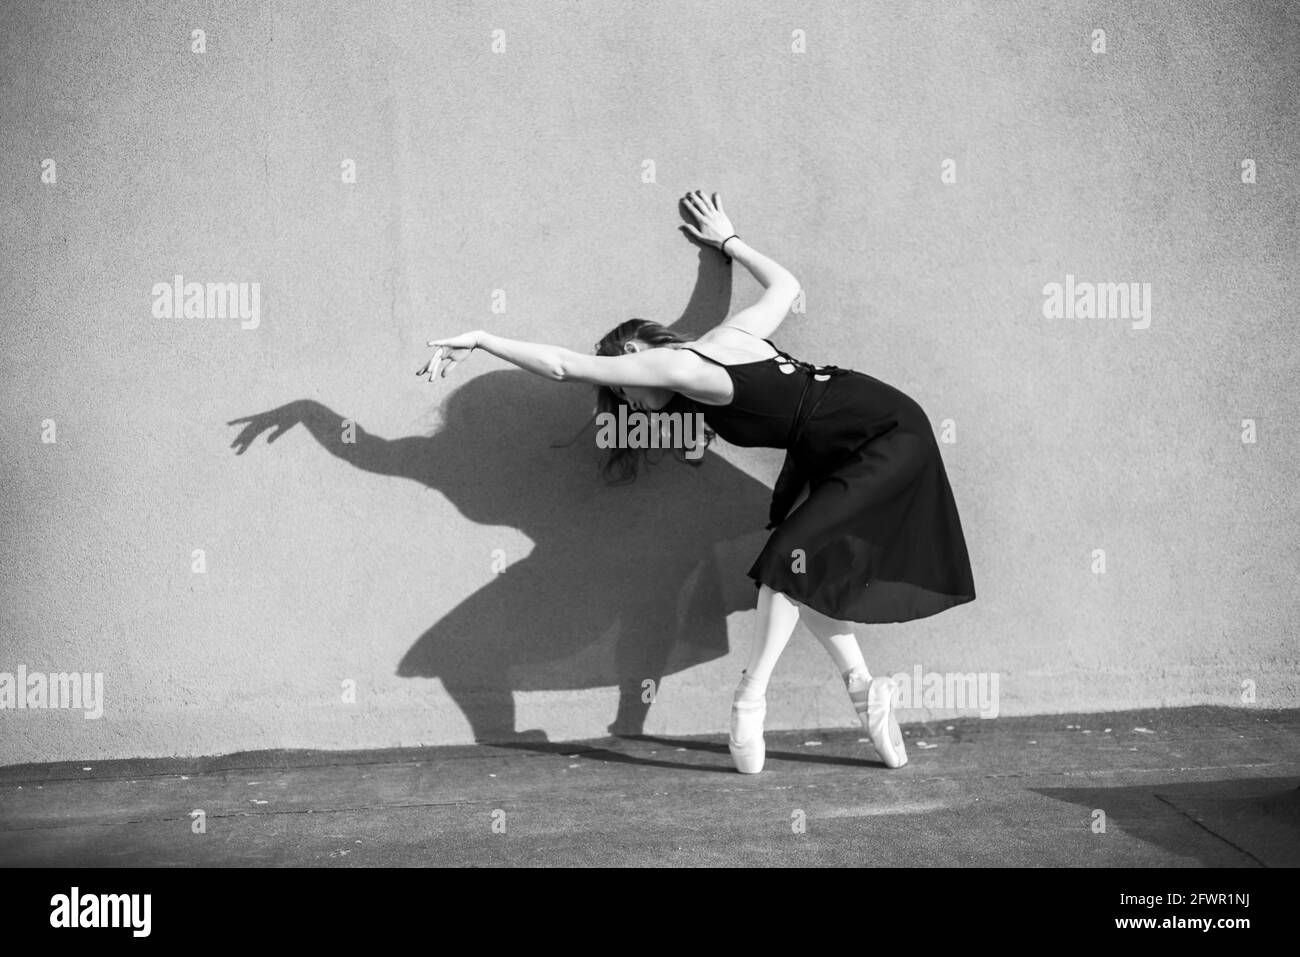 Page 3 - Jump Over Wall High Resolution Stock Photography and Images - Alamy